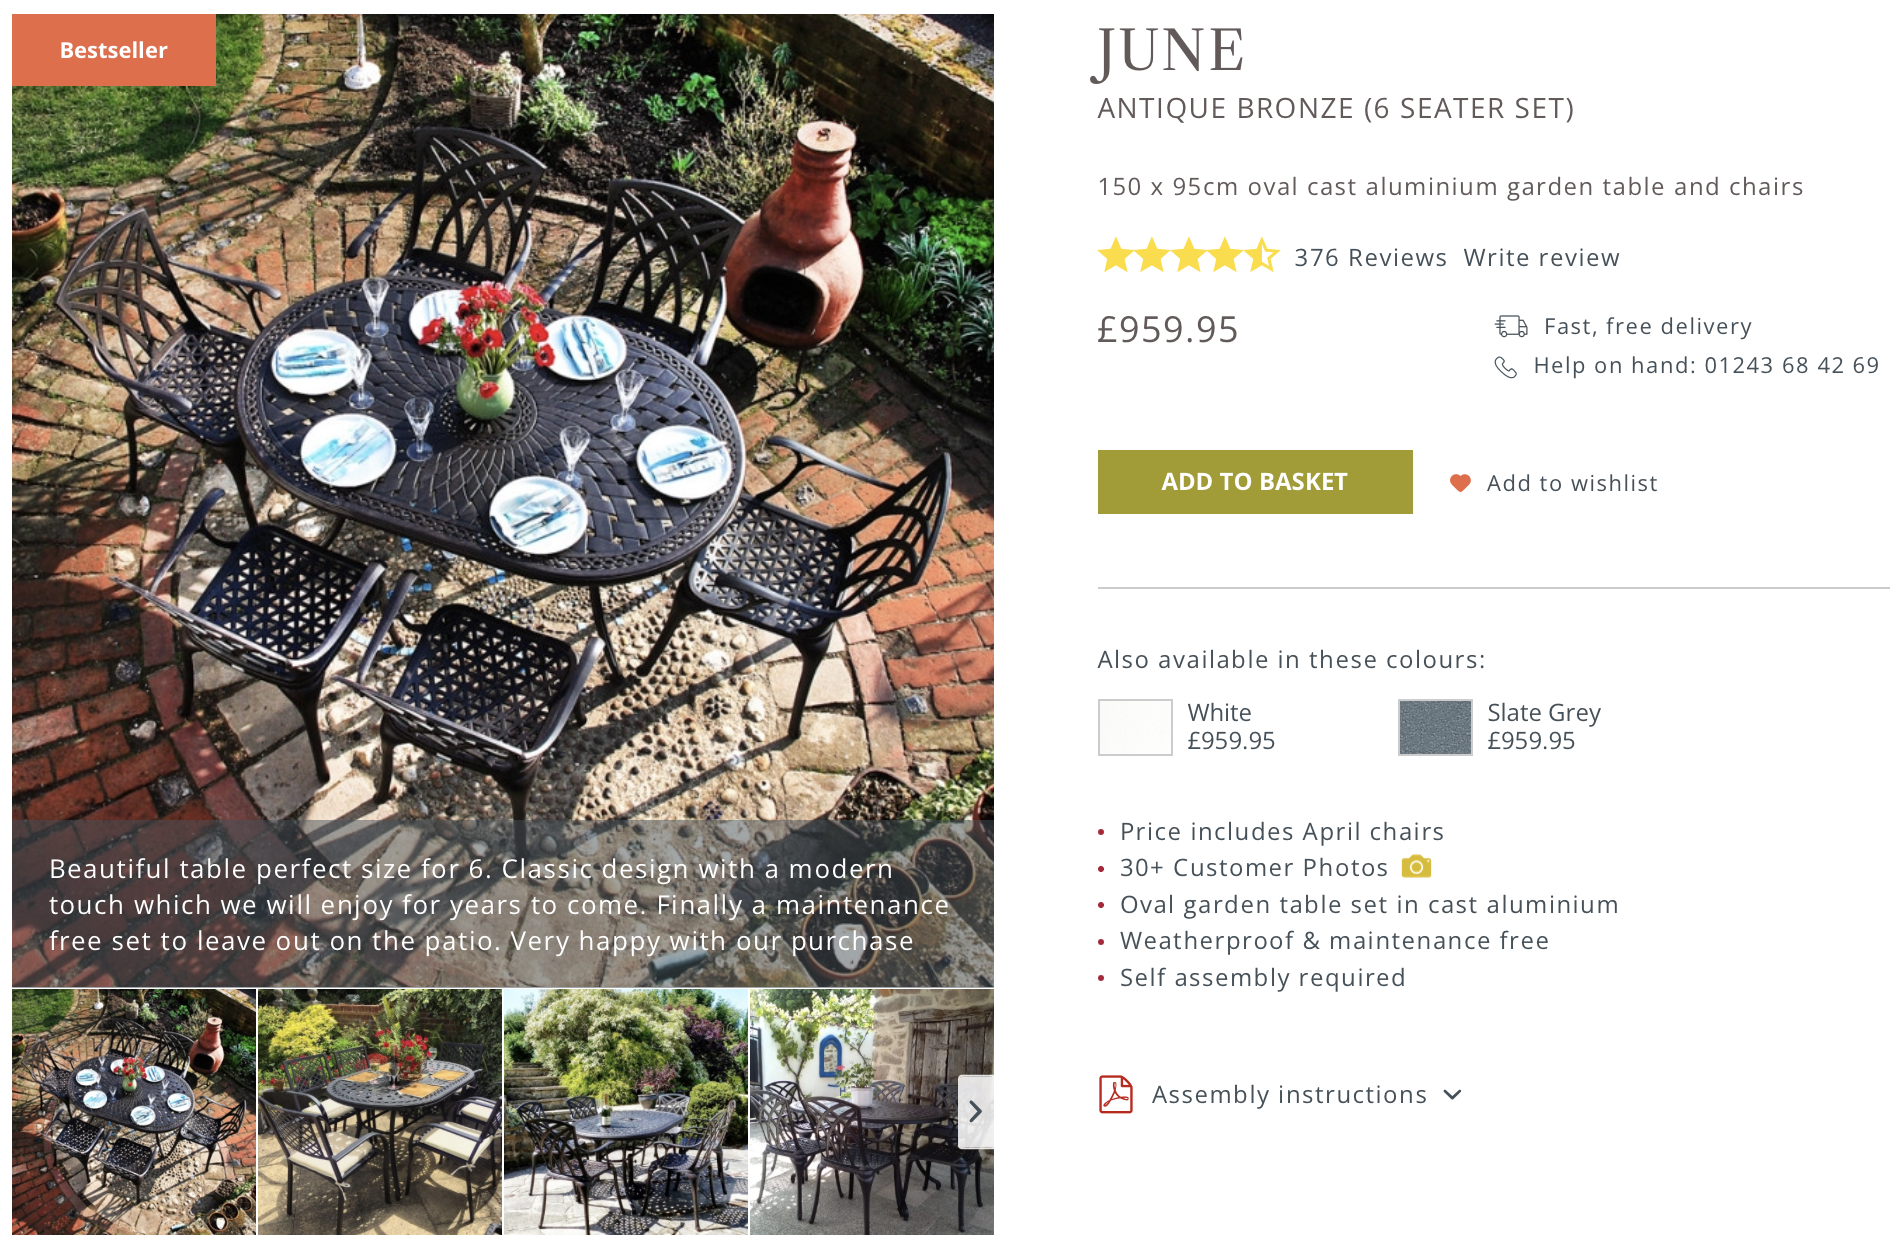 Colour & Finish of our Outdoor Furniture - June Outdoor Table Range